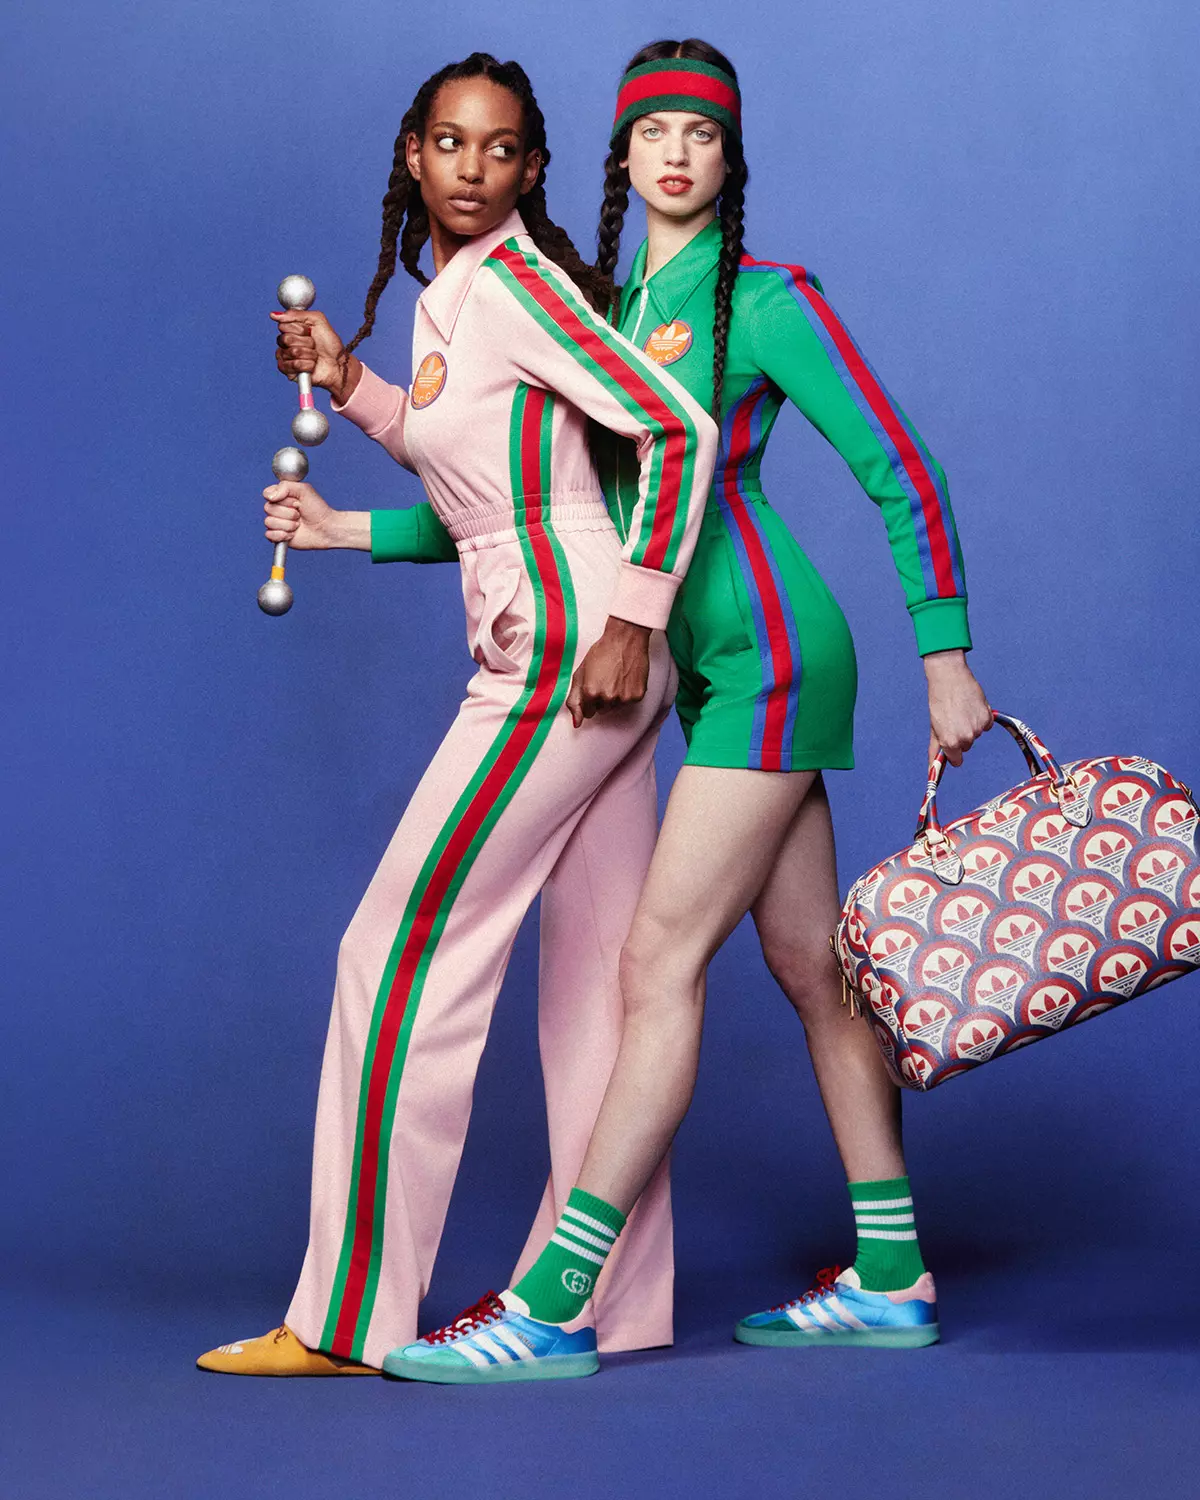 adidas and Gucci bring 80's fitness style back to the forefront